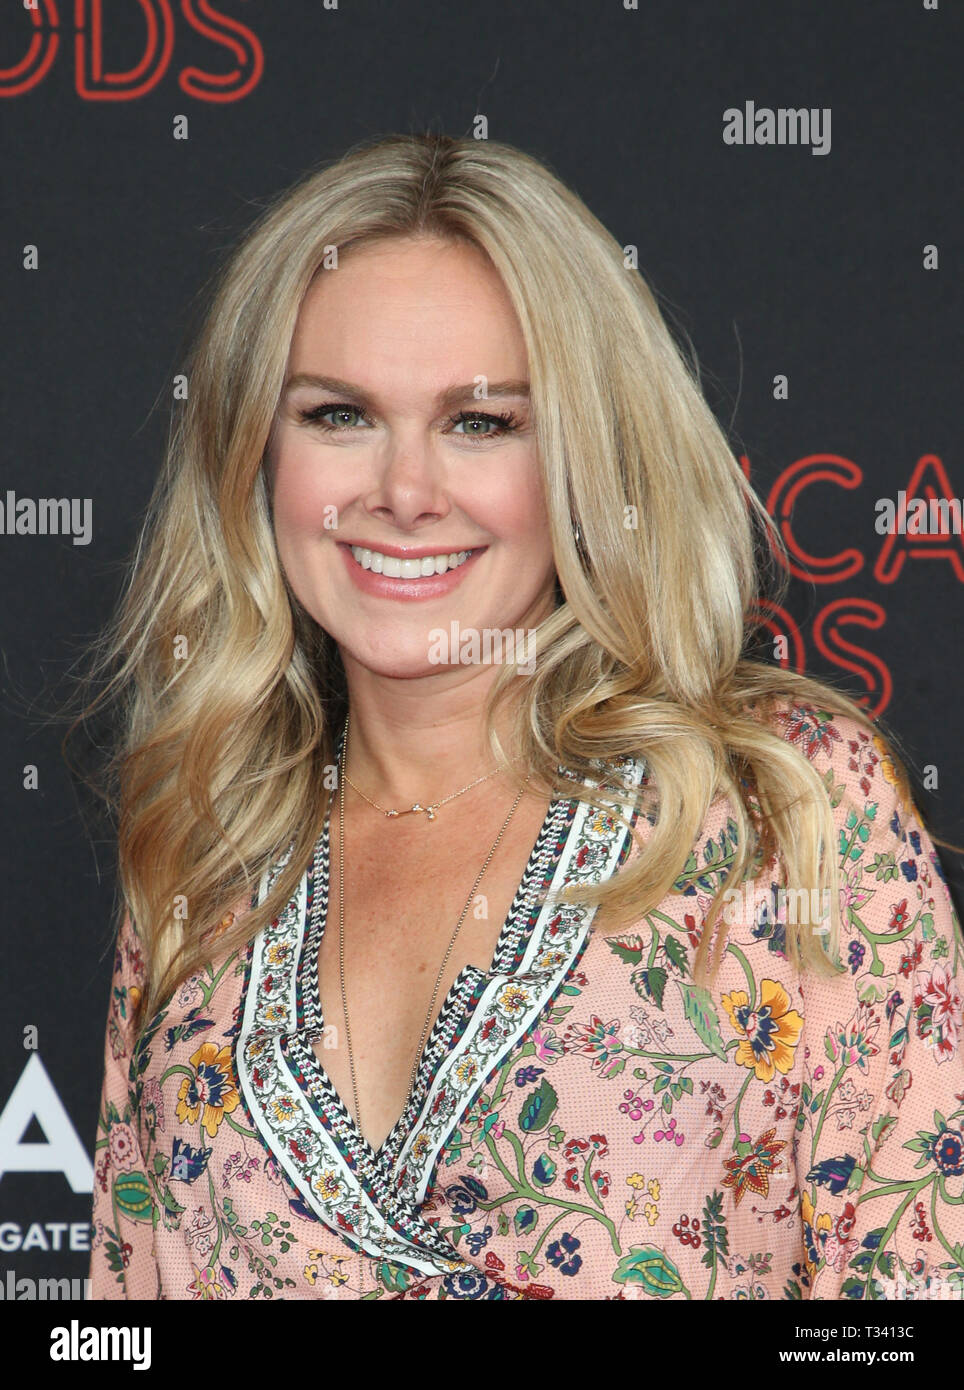 Premiere Of STARZ's "American Gods" Season 2 Featuring: Laura Bell Bundy  Where: Los Angeles, California, United States When: 05 Mar 2019 Credit:  FayesVision/WENN.com Stock Photo - Alamy